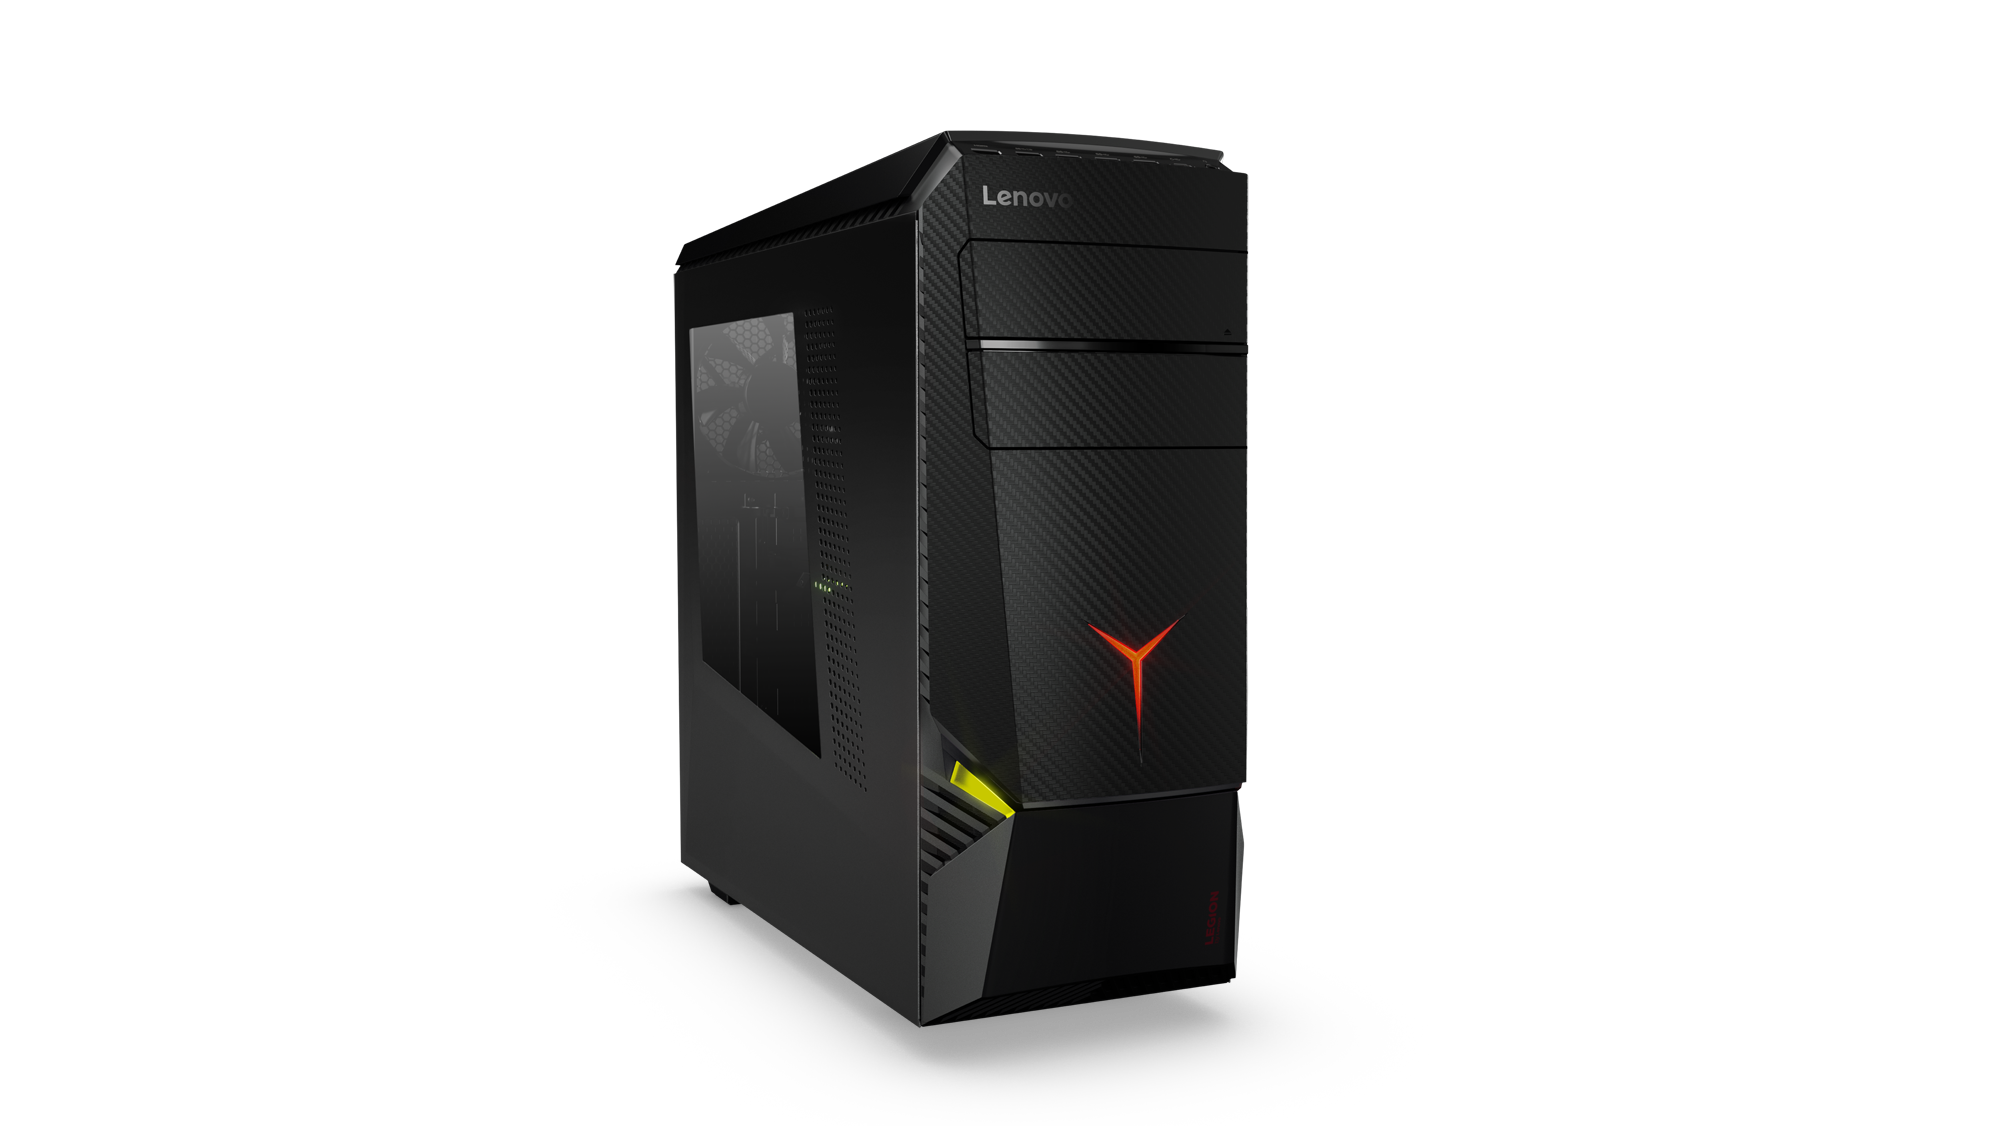 Lenovo Legion Y920 Tower shown at an angle